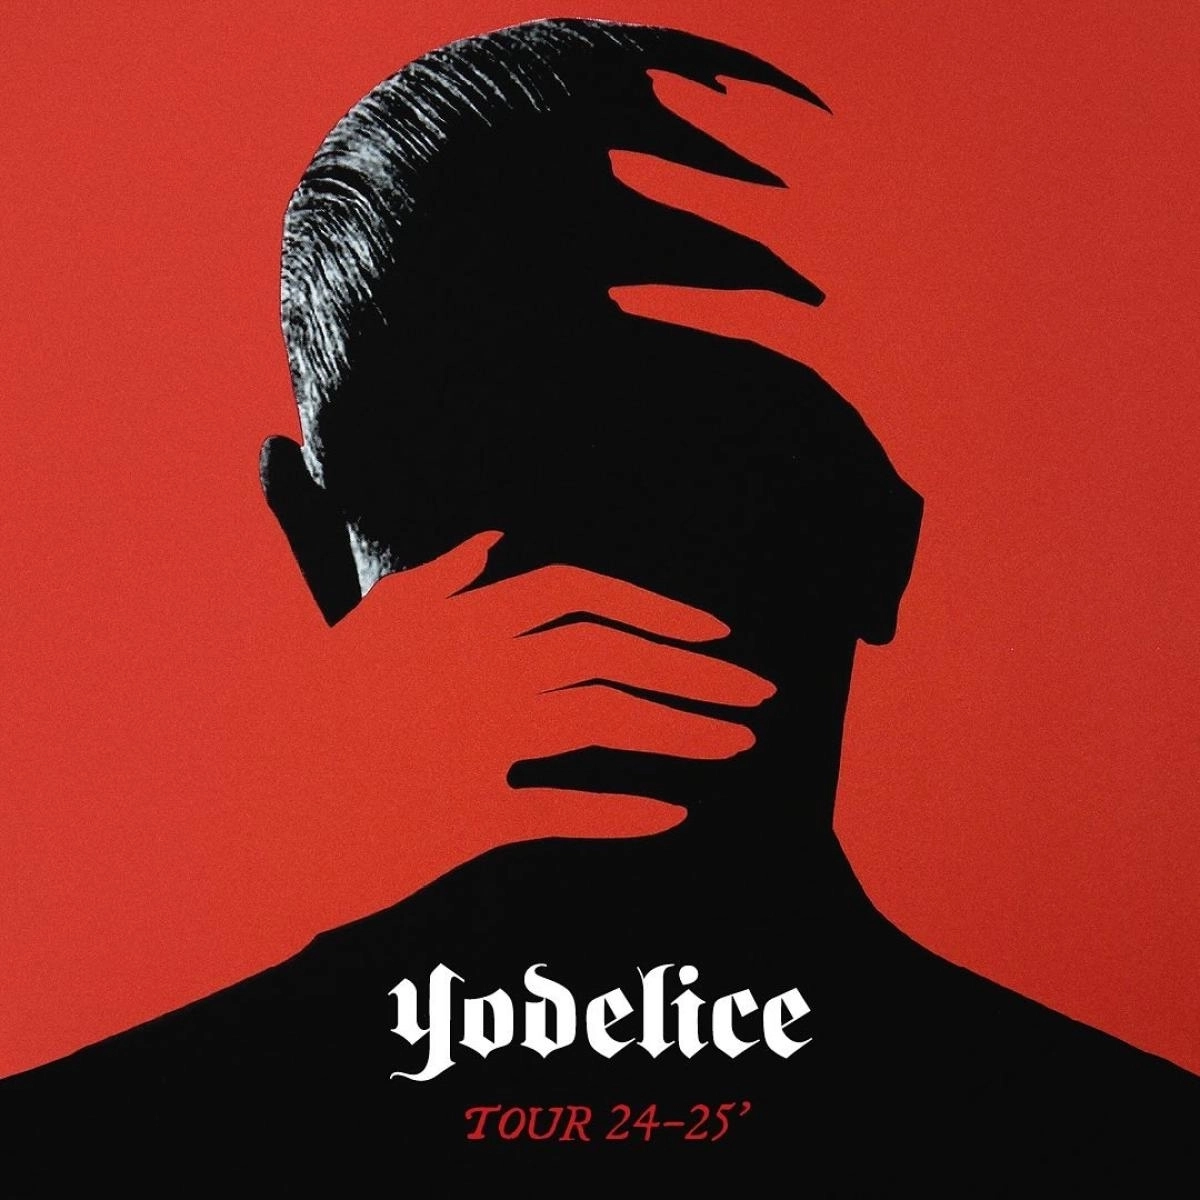 Yodelice at Stereolux Tickets